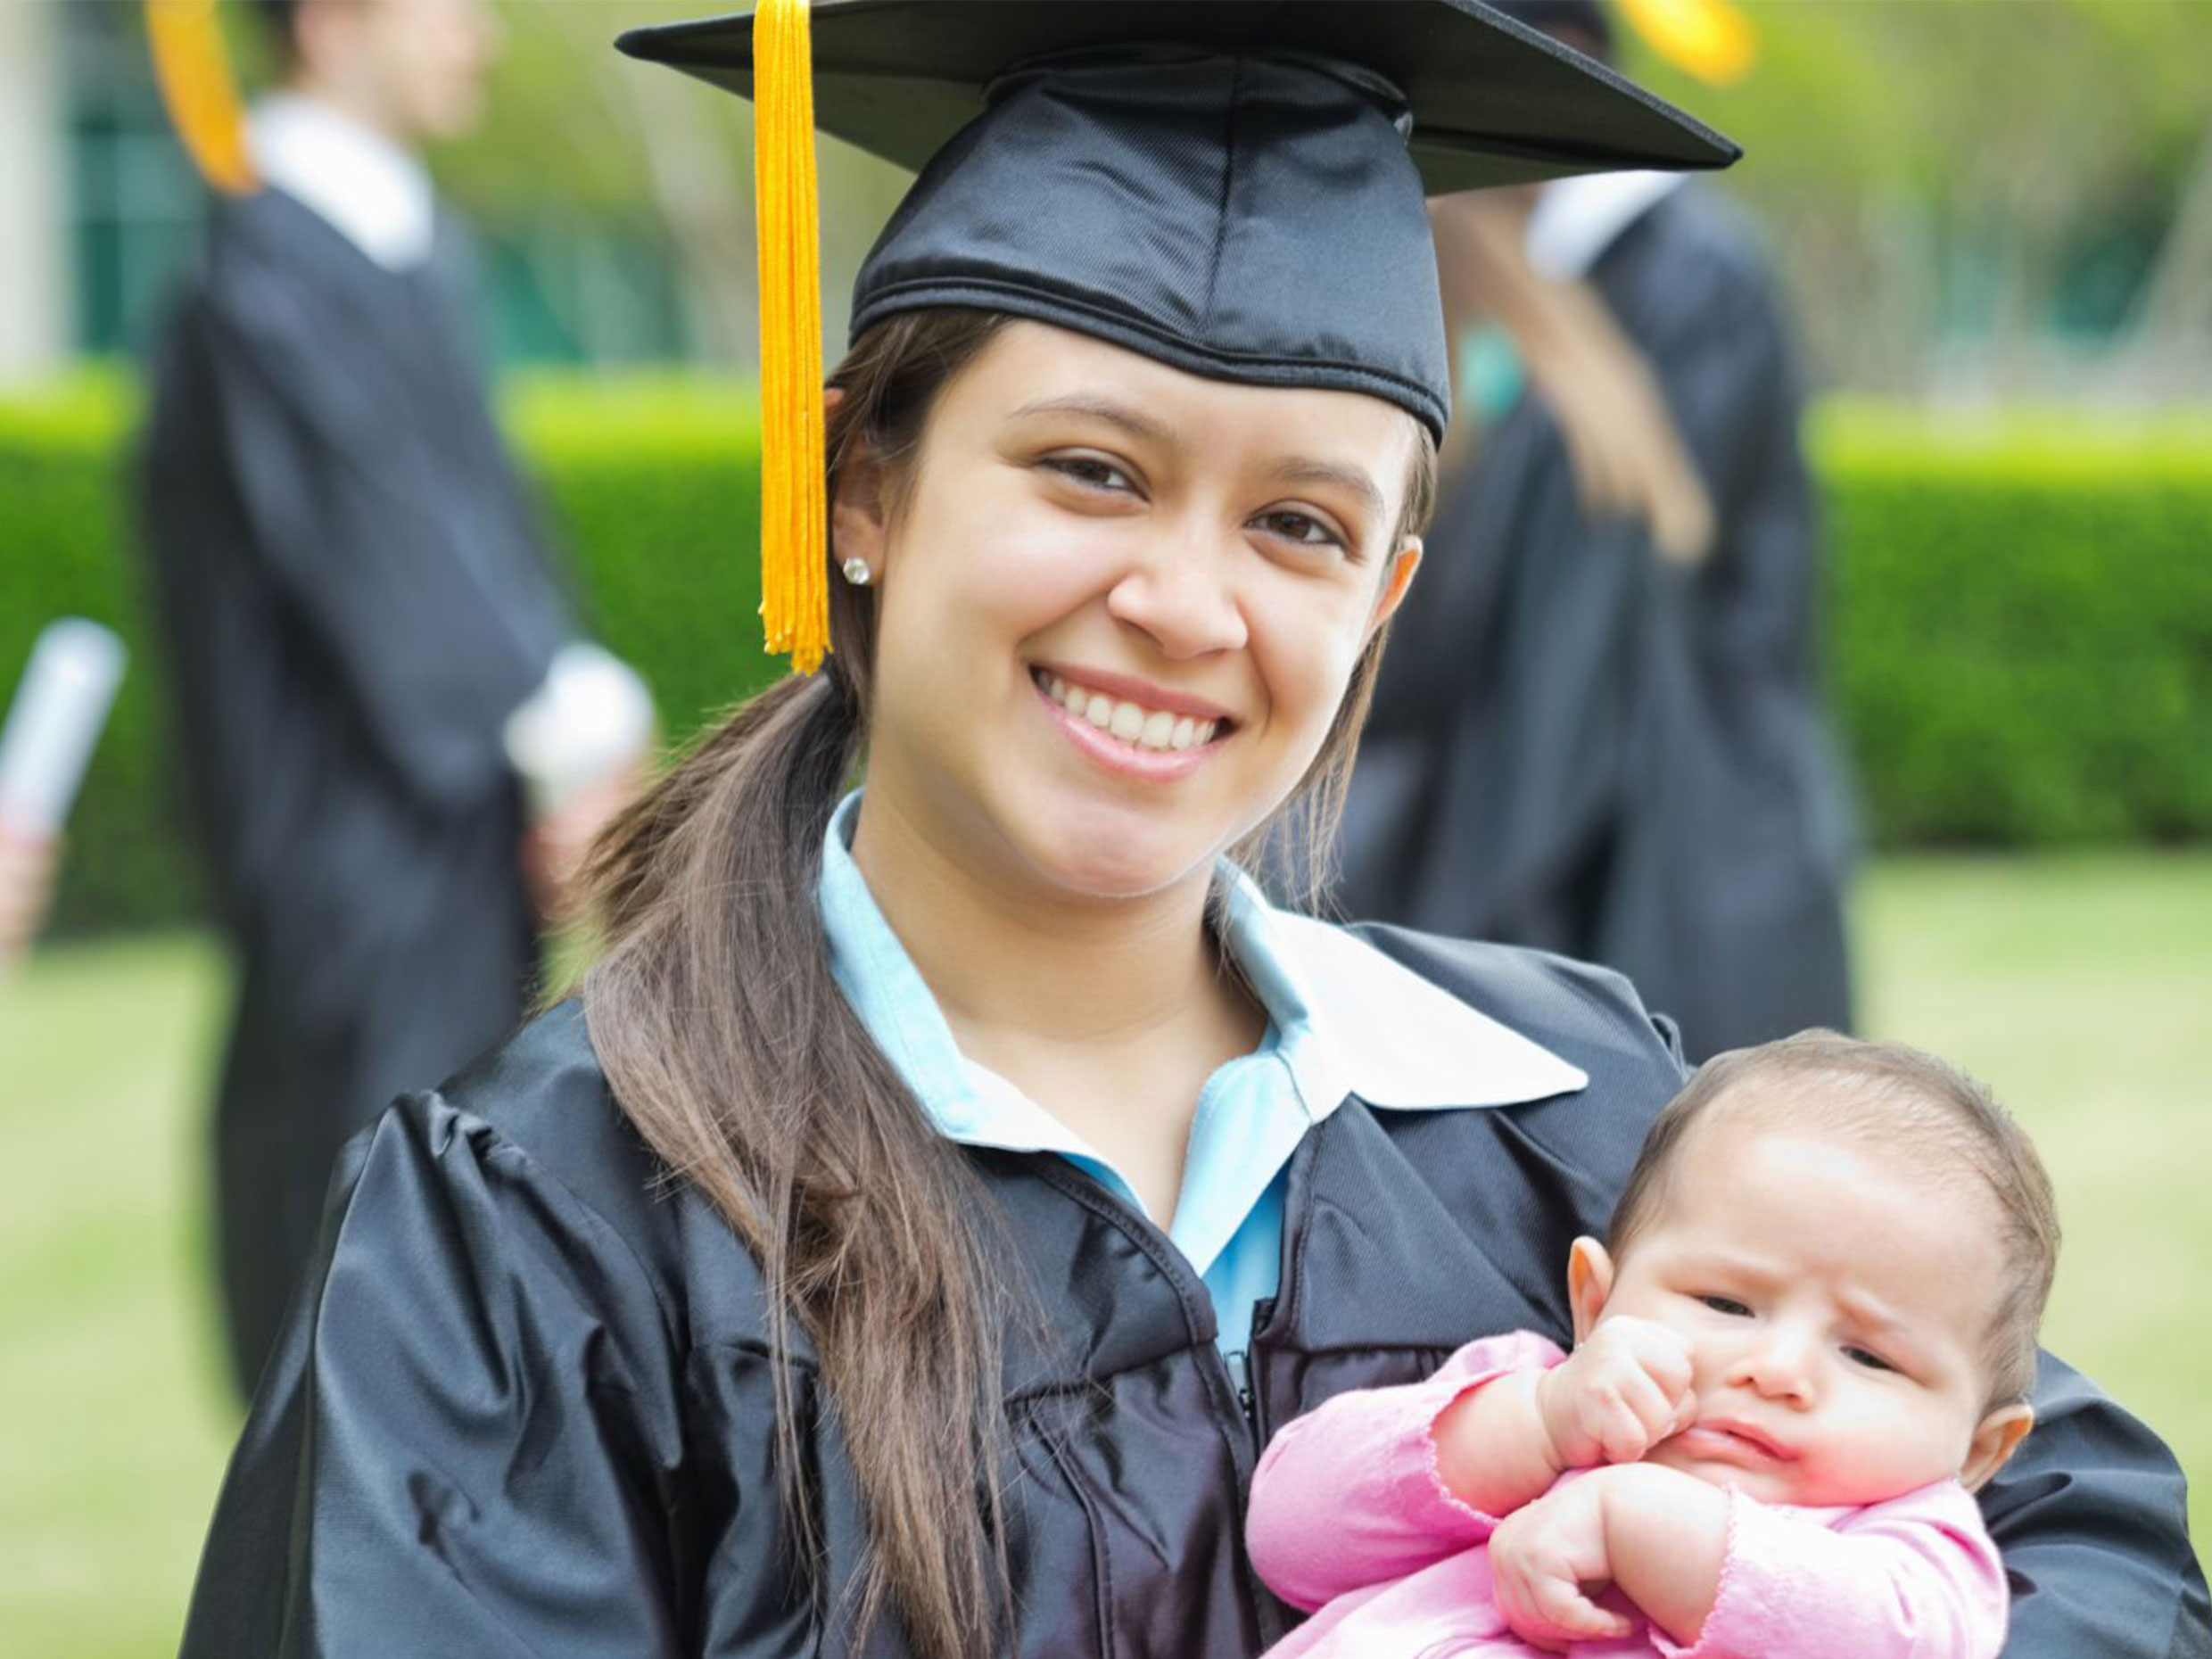 Woman with graduation cap holding a baby.